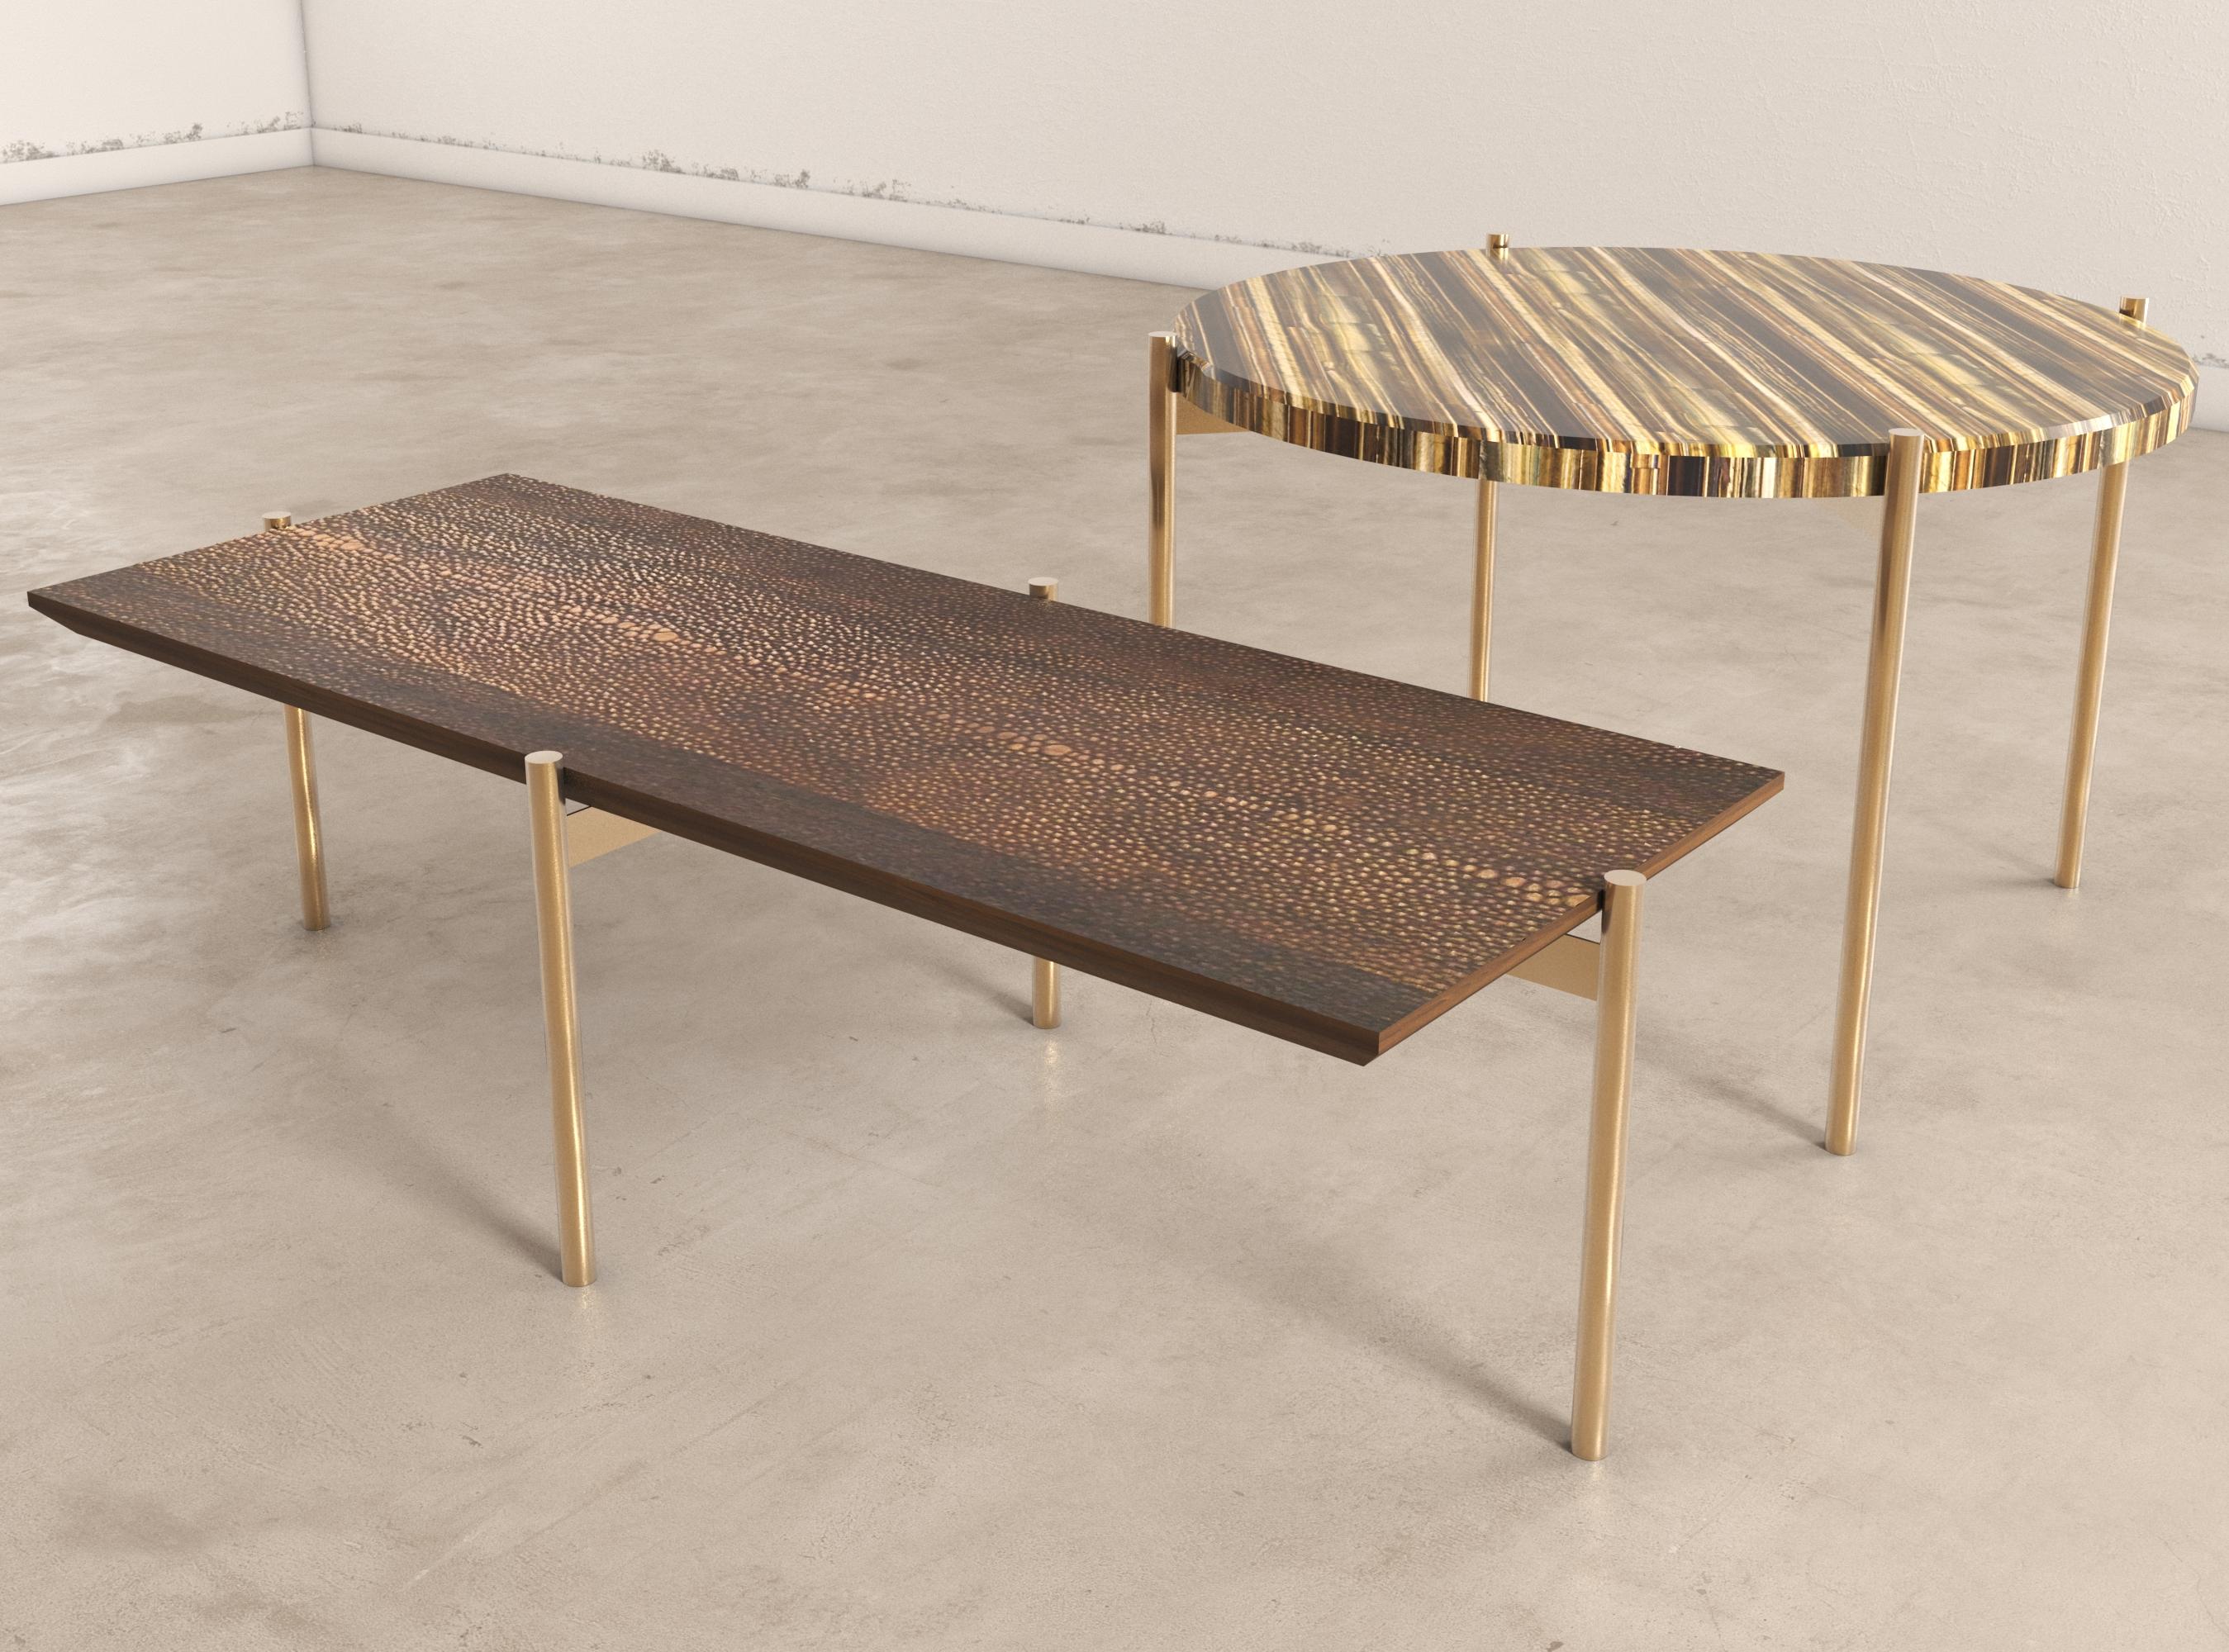 Tiger Eye´s Precious Stone and Wood Tom & Tom Table Handsculpted by ELEMENT&CO
Dimensions: 105 x 40 x 36 cm wood table
 70 Ø x 46 cm Tiger eye table
Materials: African exotic wood, Tiger Eye's precious stone 

Round table with tiger eye